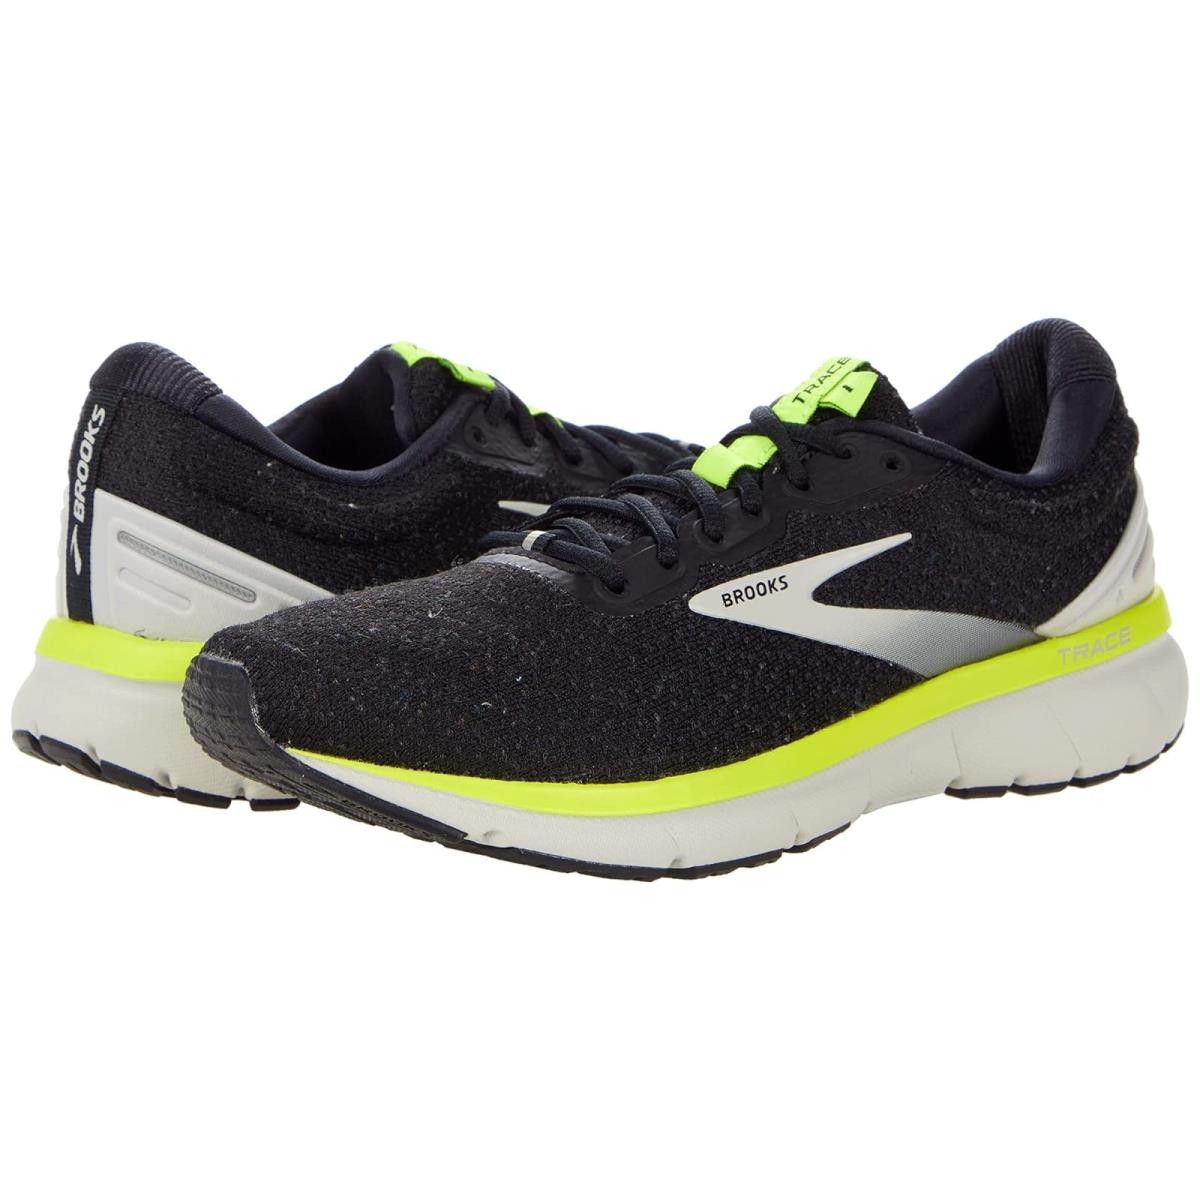 Man`s Sneakers Athletic Shoes Brooks Trace Black/Grey/Nightlife